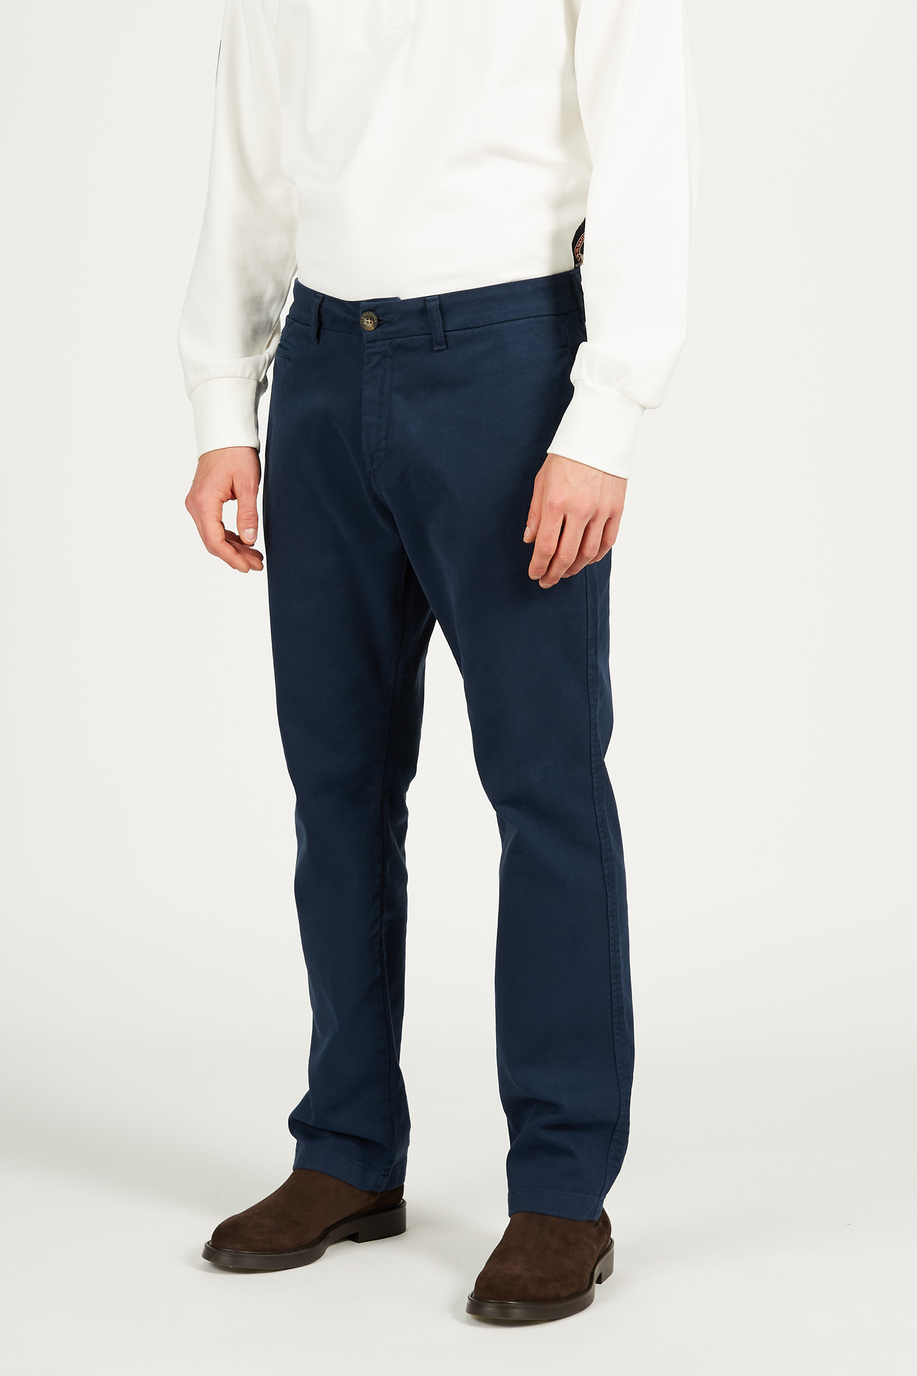 Men’s trousers in cotton regular fit chino model - Trousers | La Martina - Official Online Shop